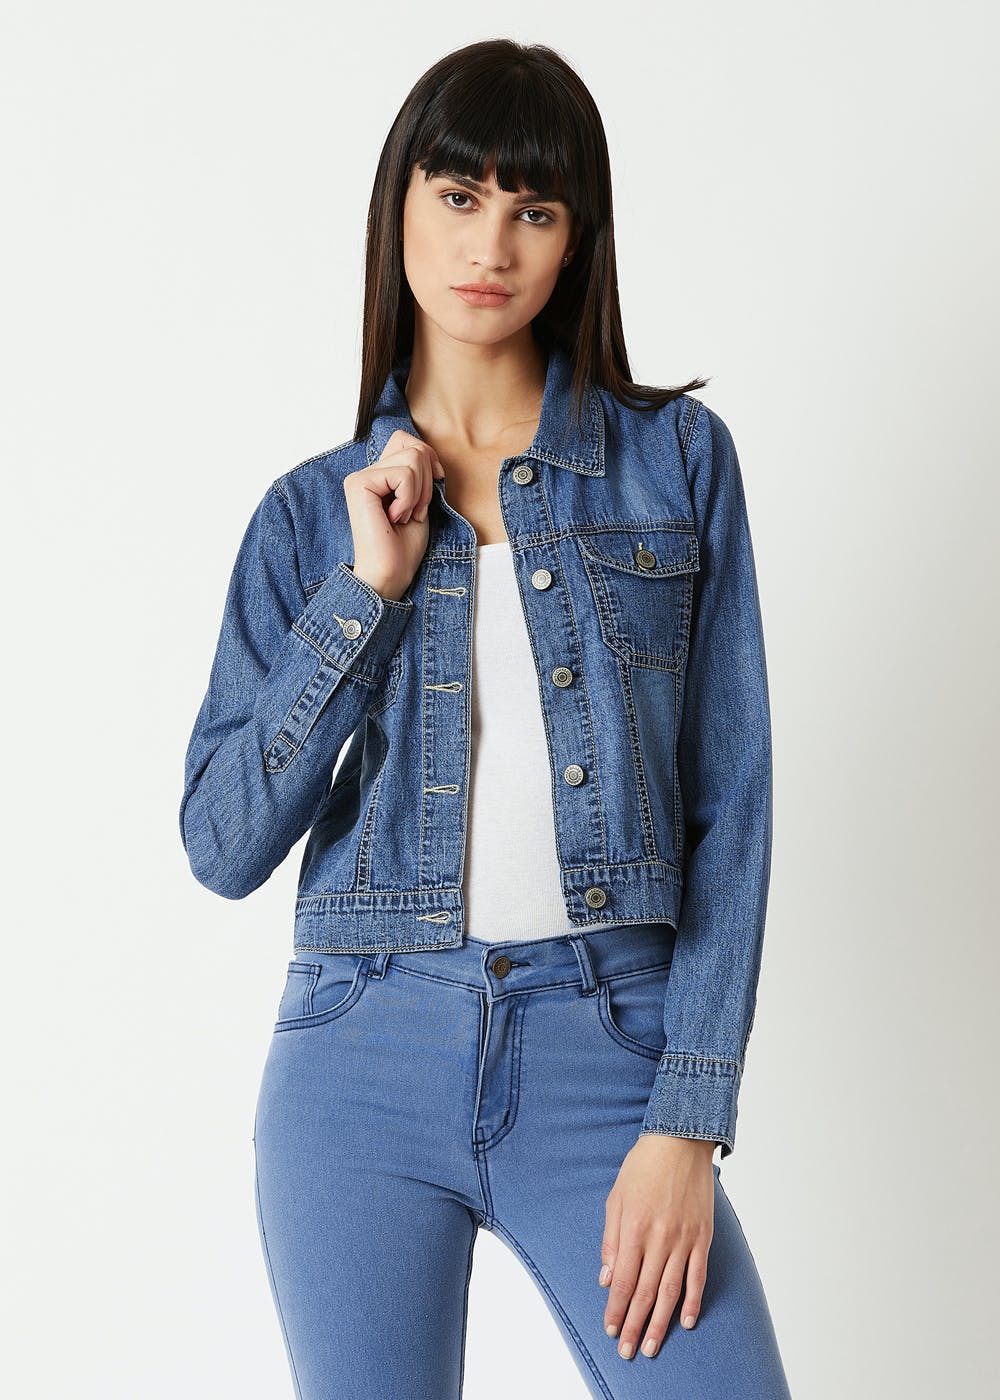 Jean jackets - How to style your denim jacket with black jeans for Spring |  Blue jean jacket outfits, Jean jacket outfits, Denim jacket outfit